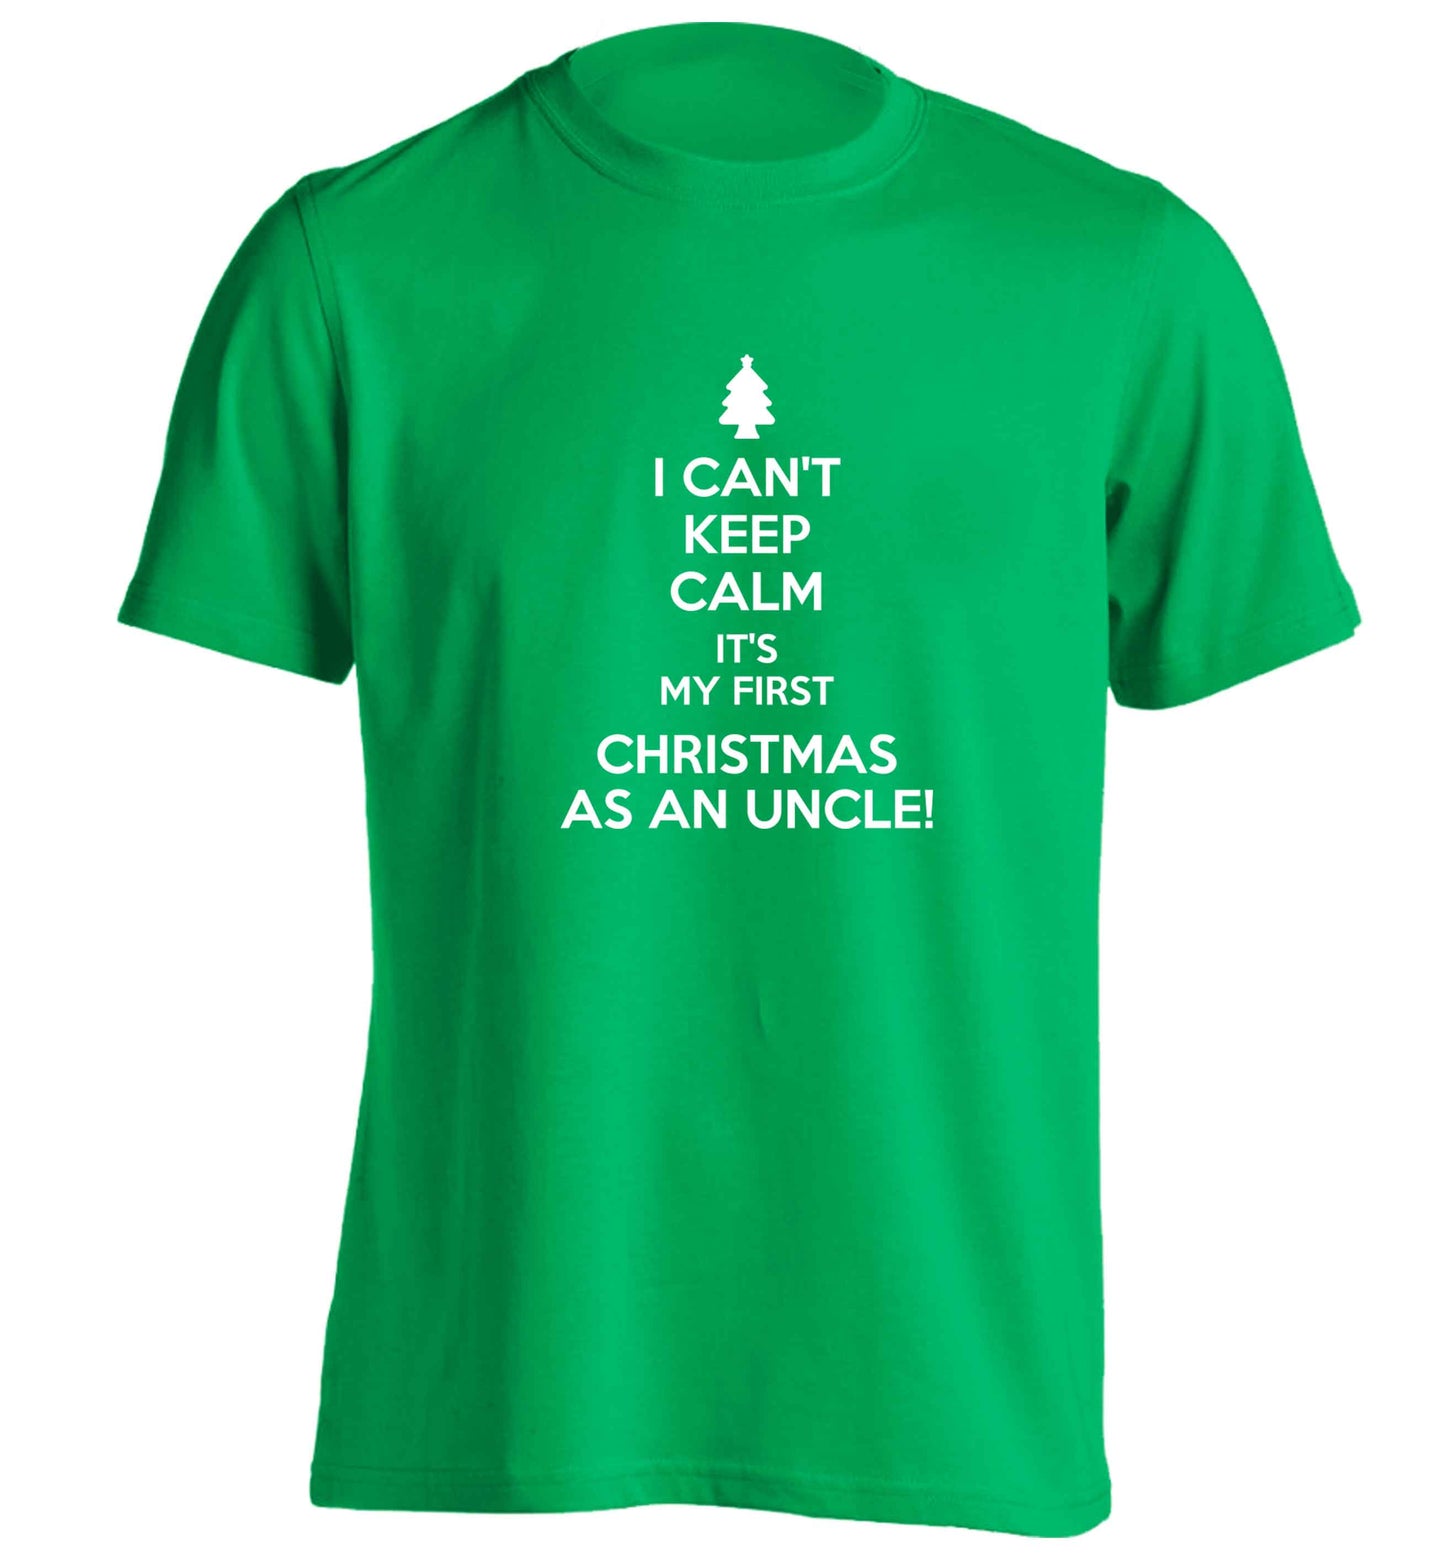 I can't keep calm it's my first Christmas as an uncle! adults unisex green Tshirt 2XL